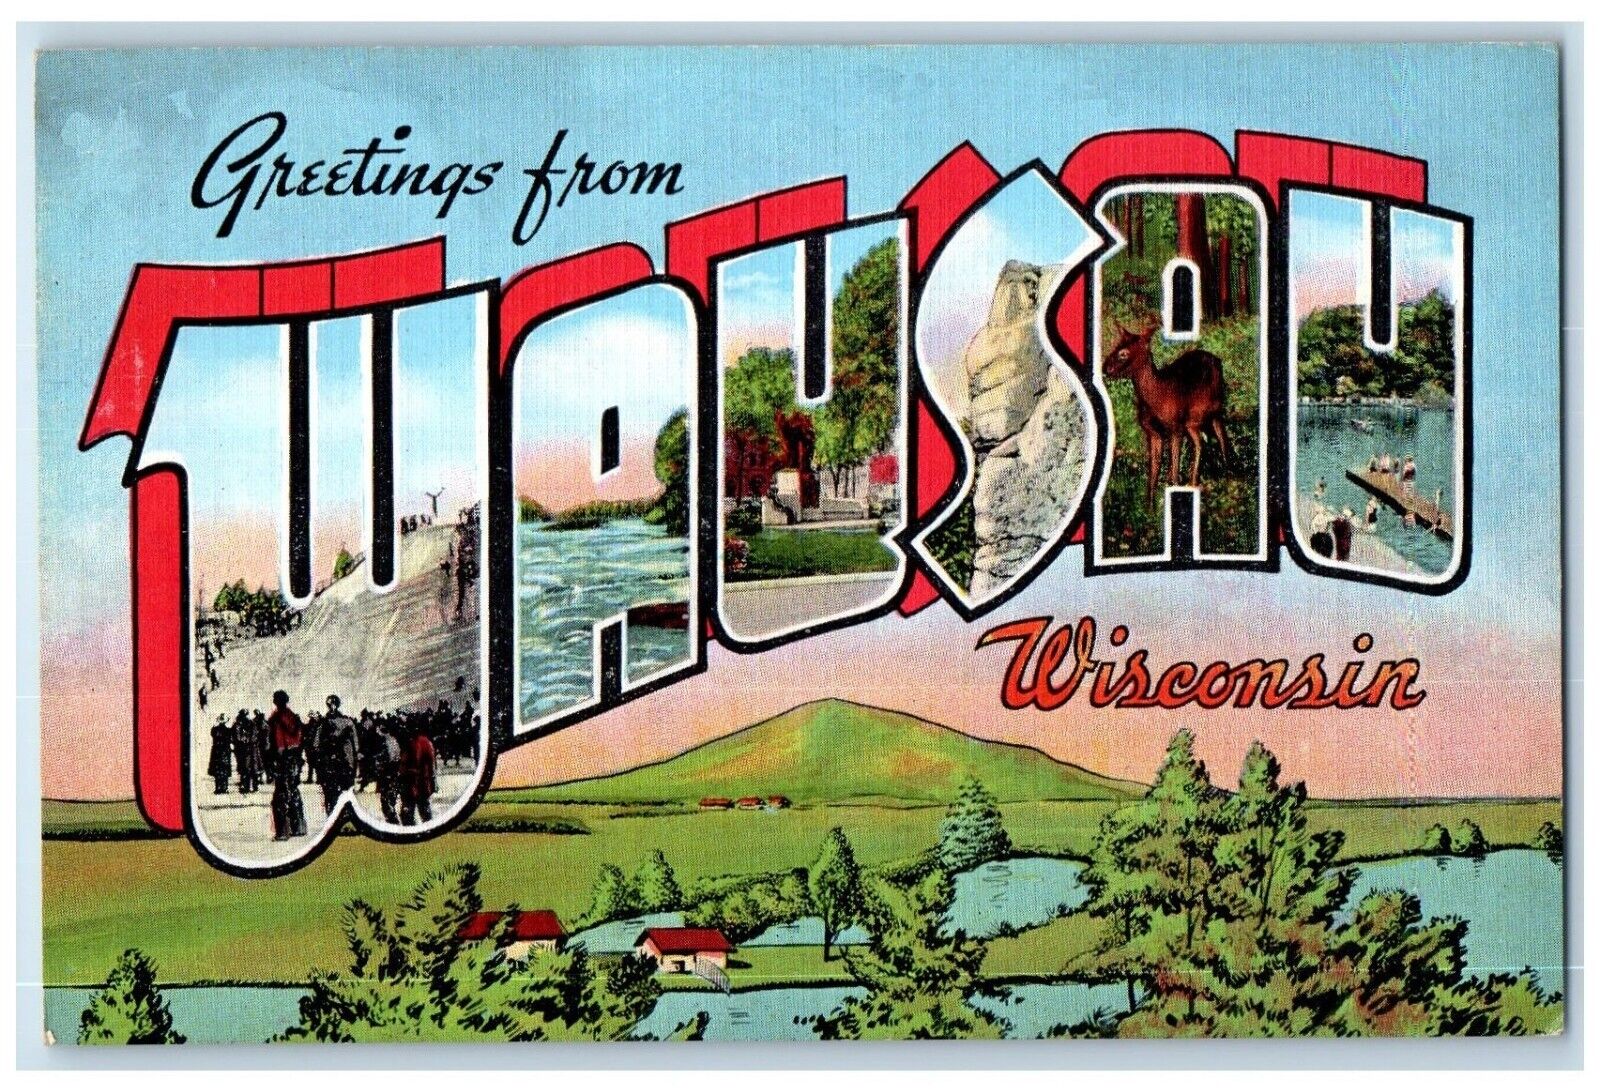 c1940 Greetings From Wausau Wisconsin Large Letters Multiview Vintage Postcard